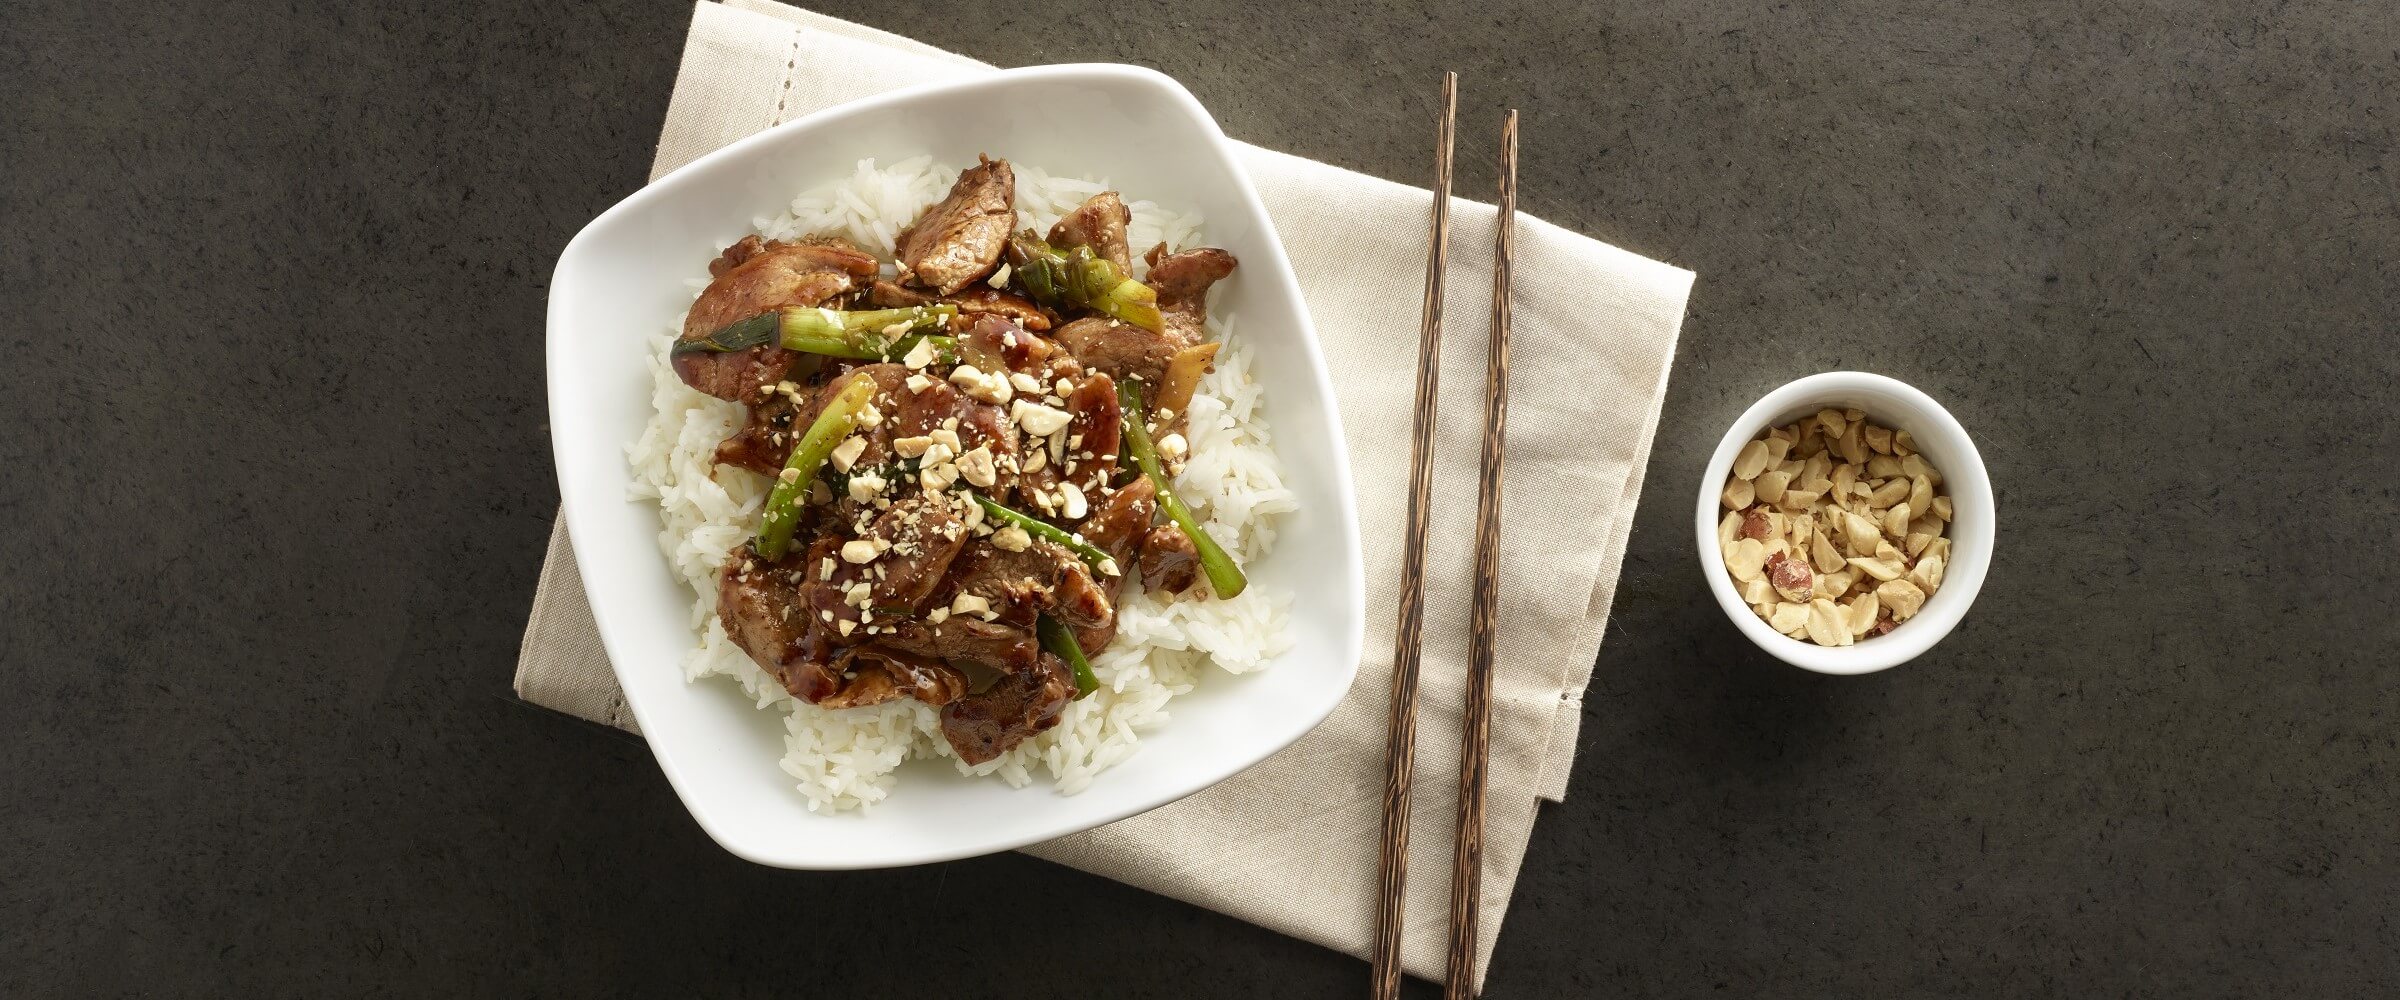 stir fry pork with peanut sauce over rice in white bowl with chopsticks